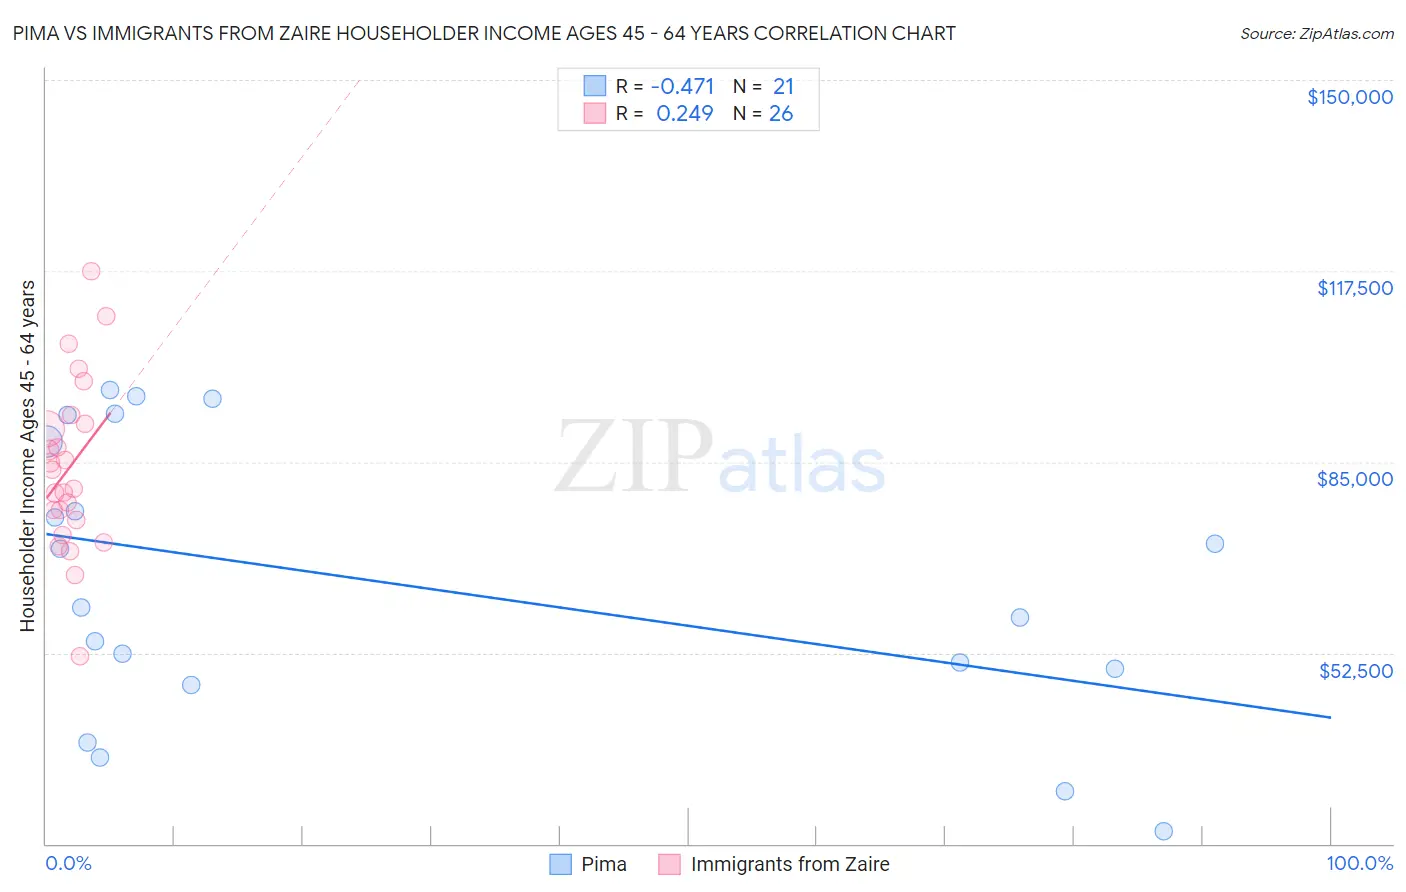 Pima vs Immigrants from Zaire Householder Income Ages 45 - 64 years